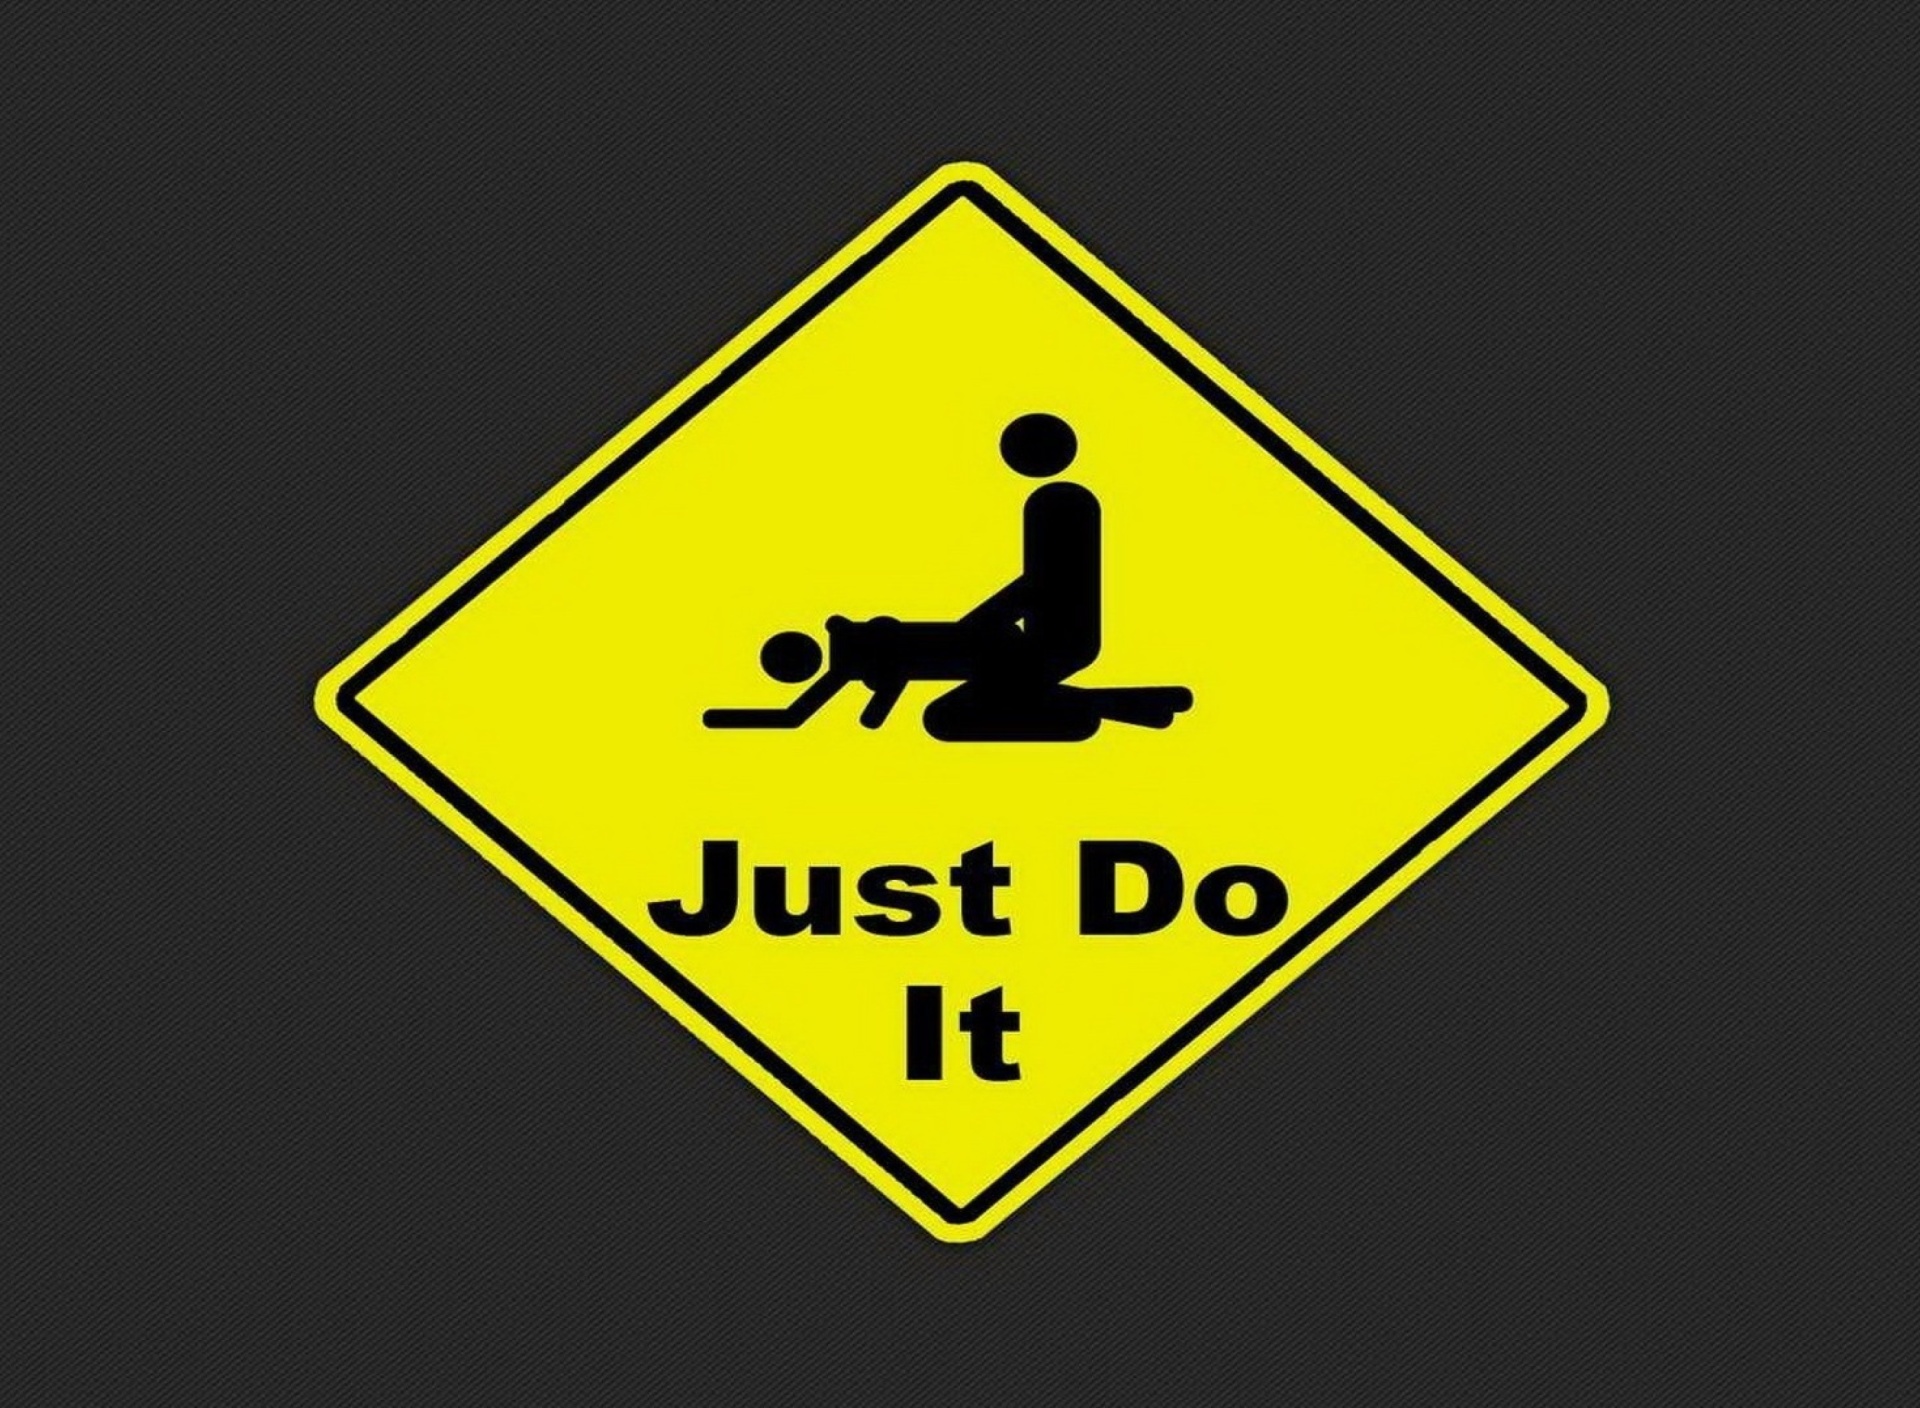 Just Do It Funny Sign screenshot #1 1920x1408